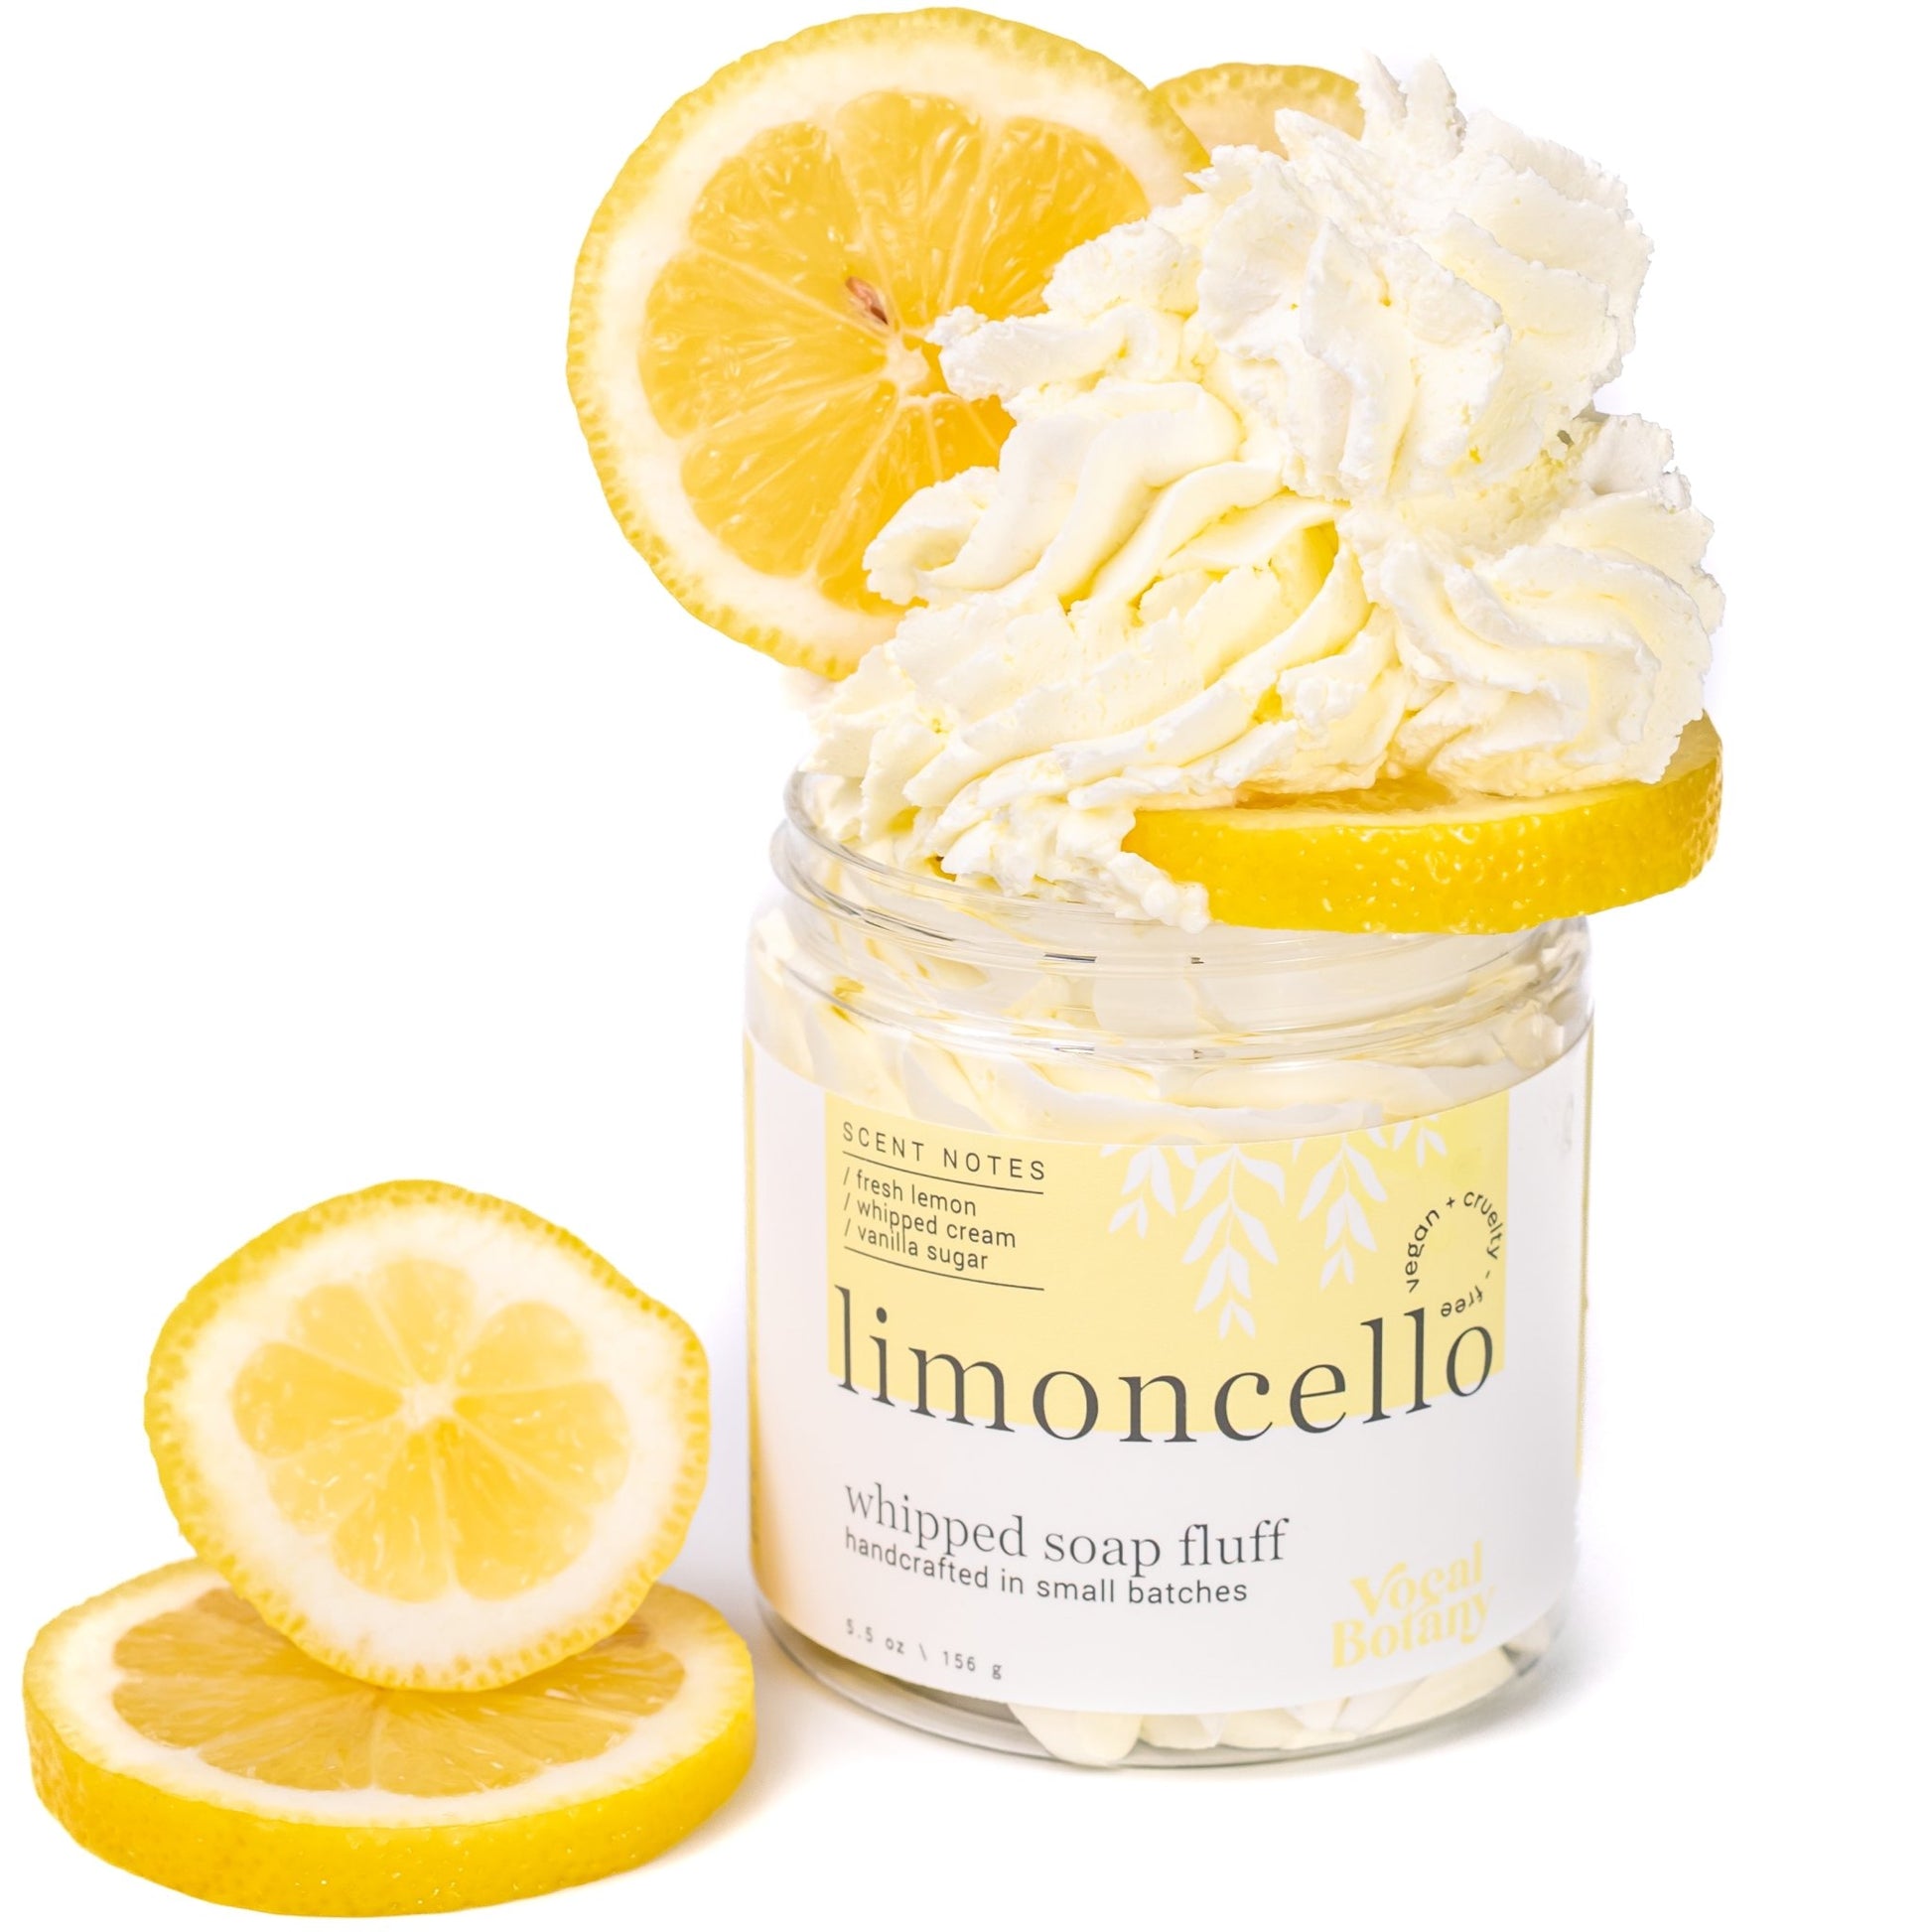 limoncello whipped soap fluff - Vocal Botany